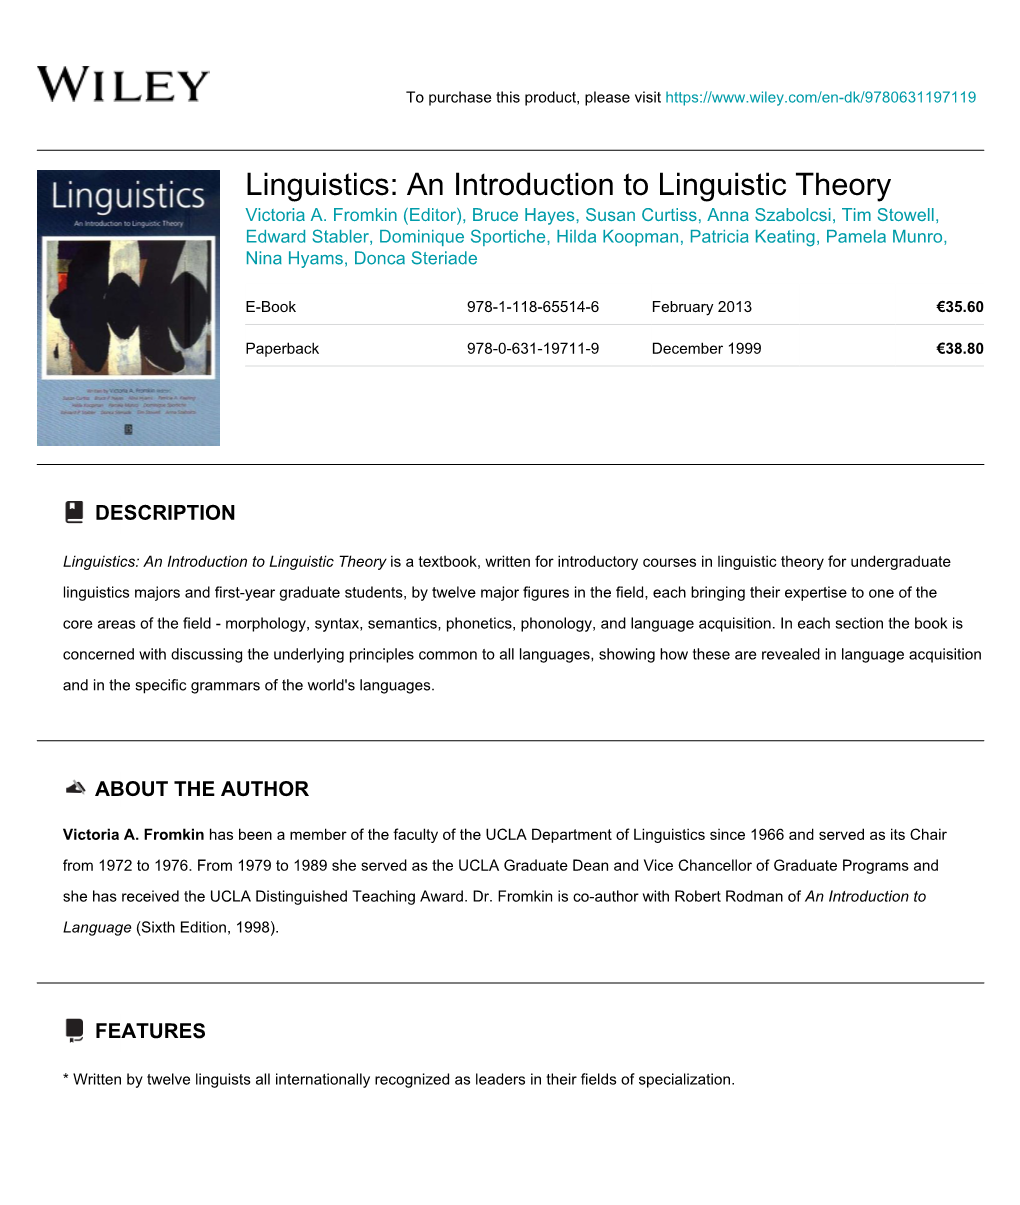 An Introduction to Linguistic Theory Victoria A